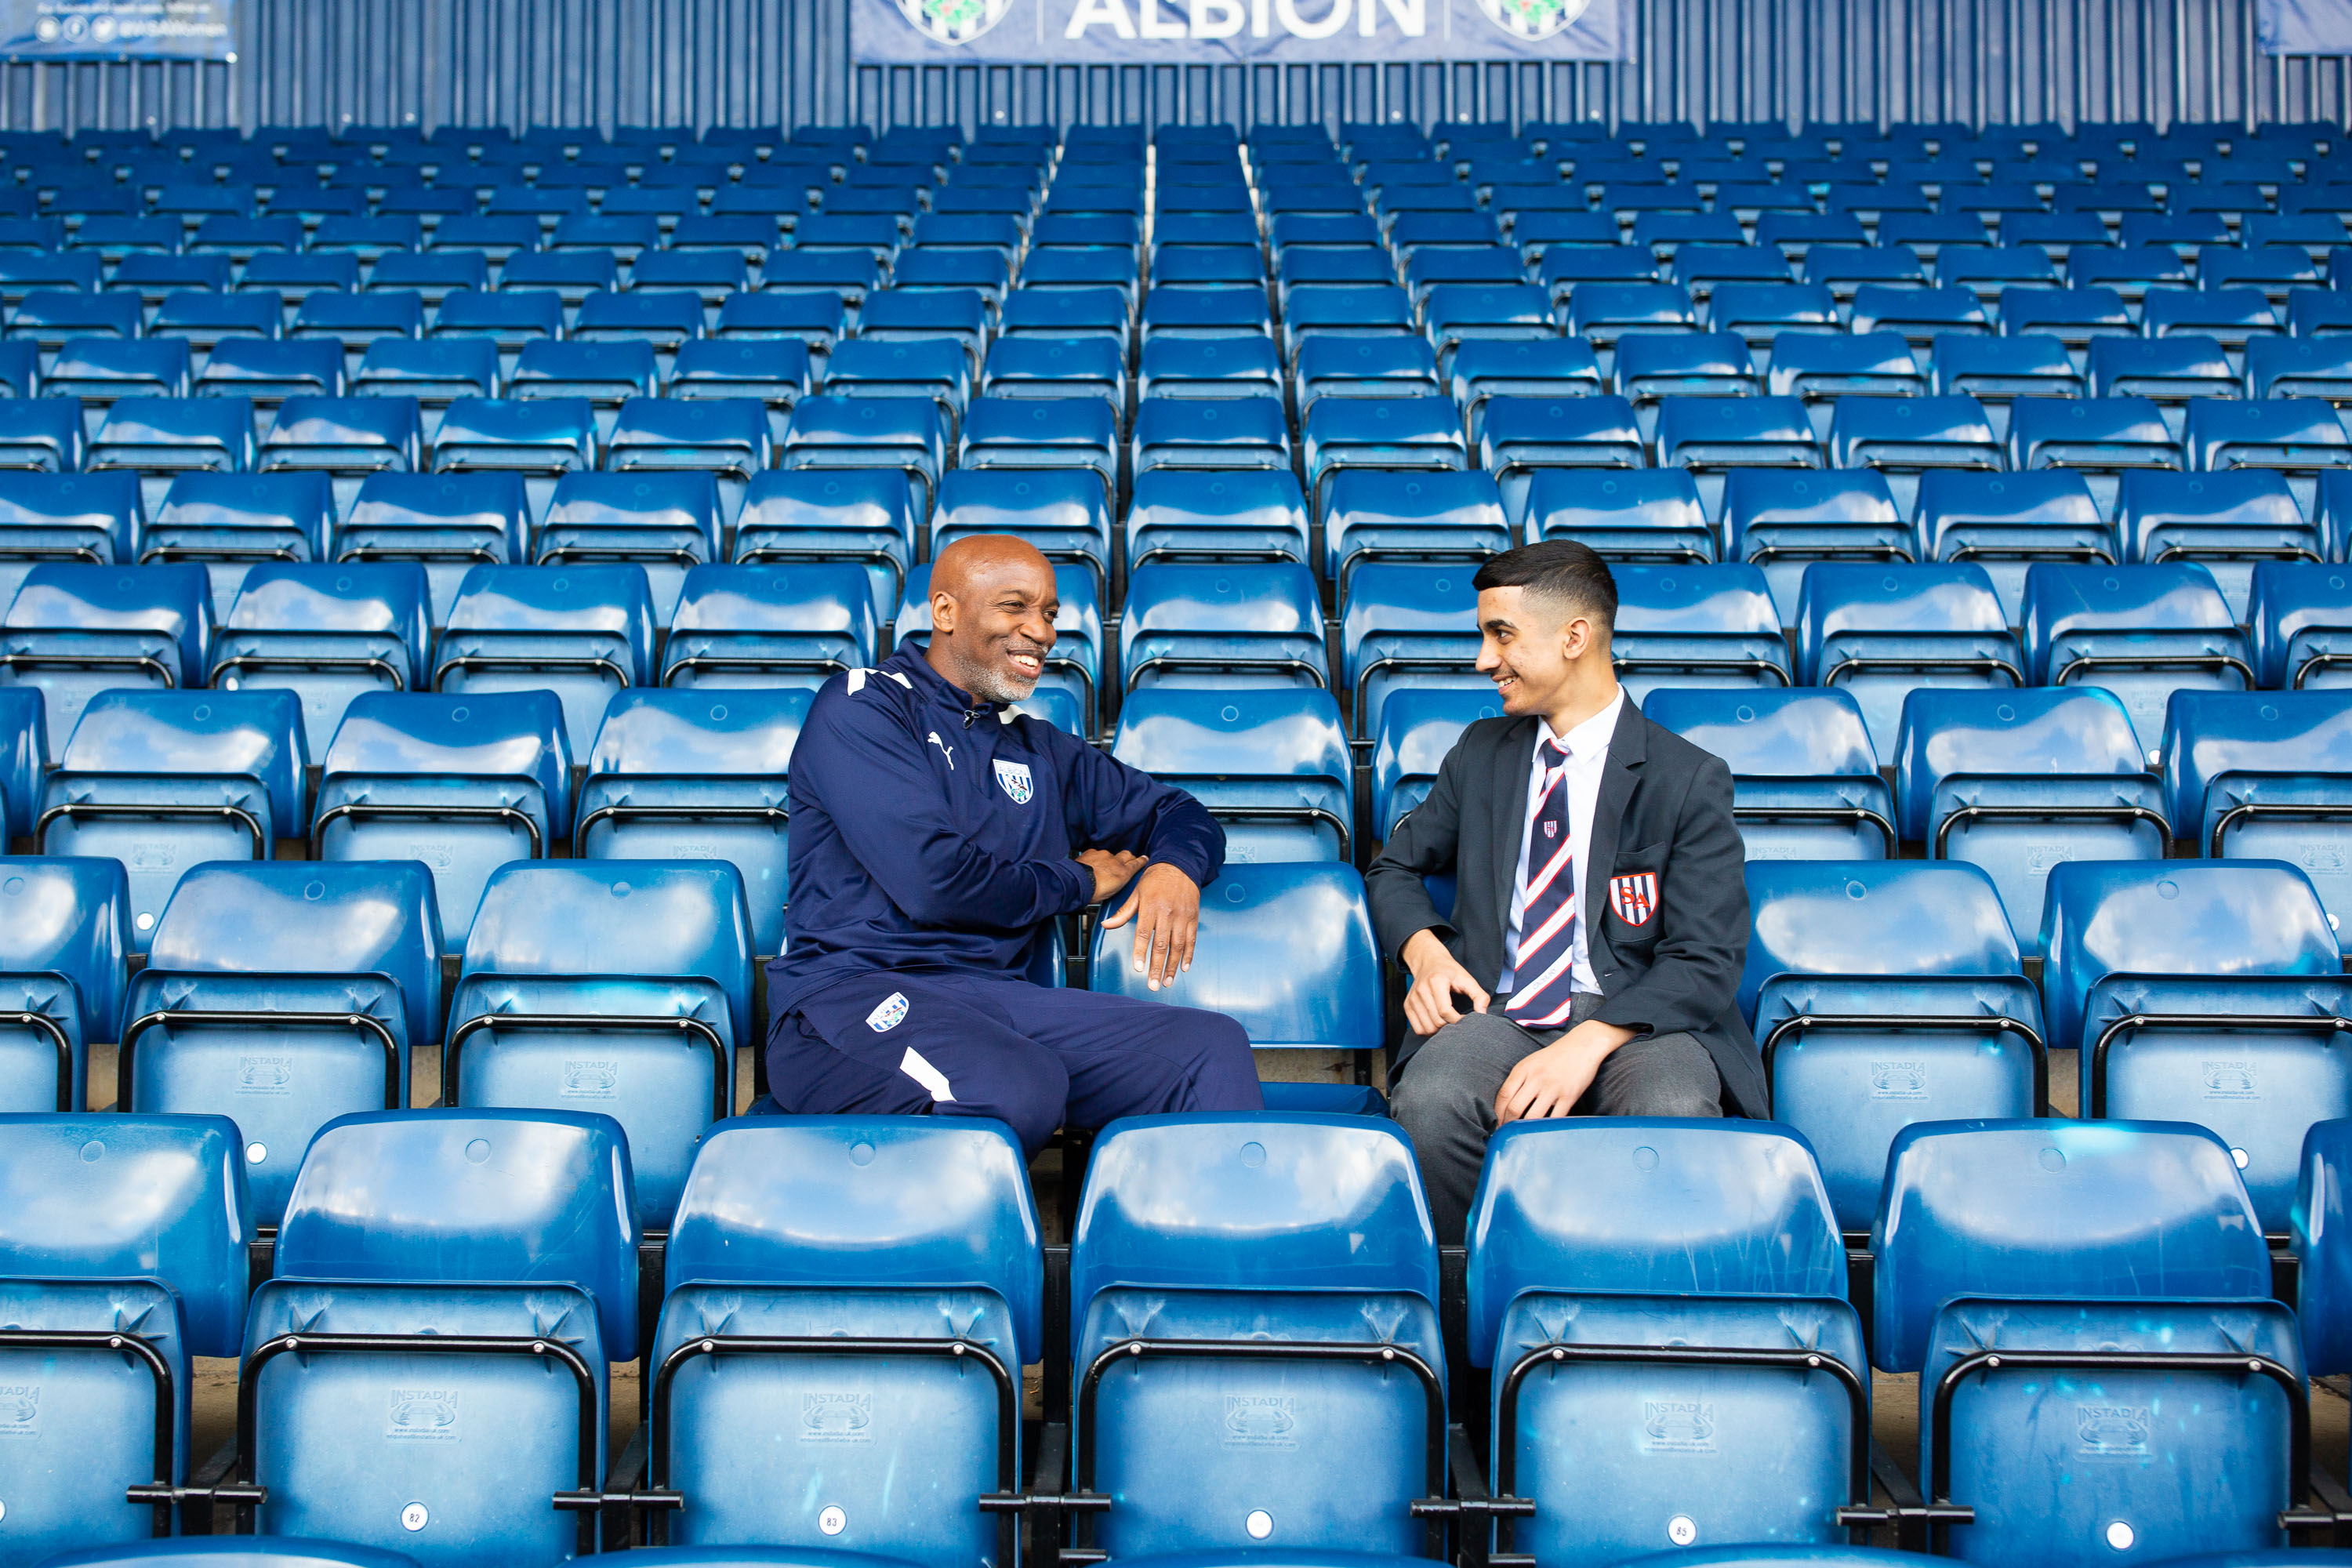 Foundation staff mentoring a student in The Hawthorns Stands